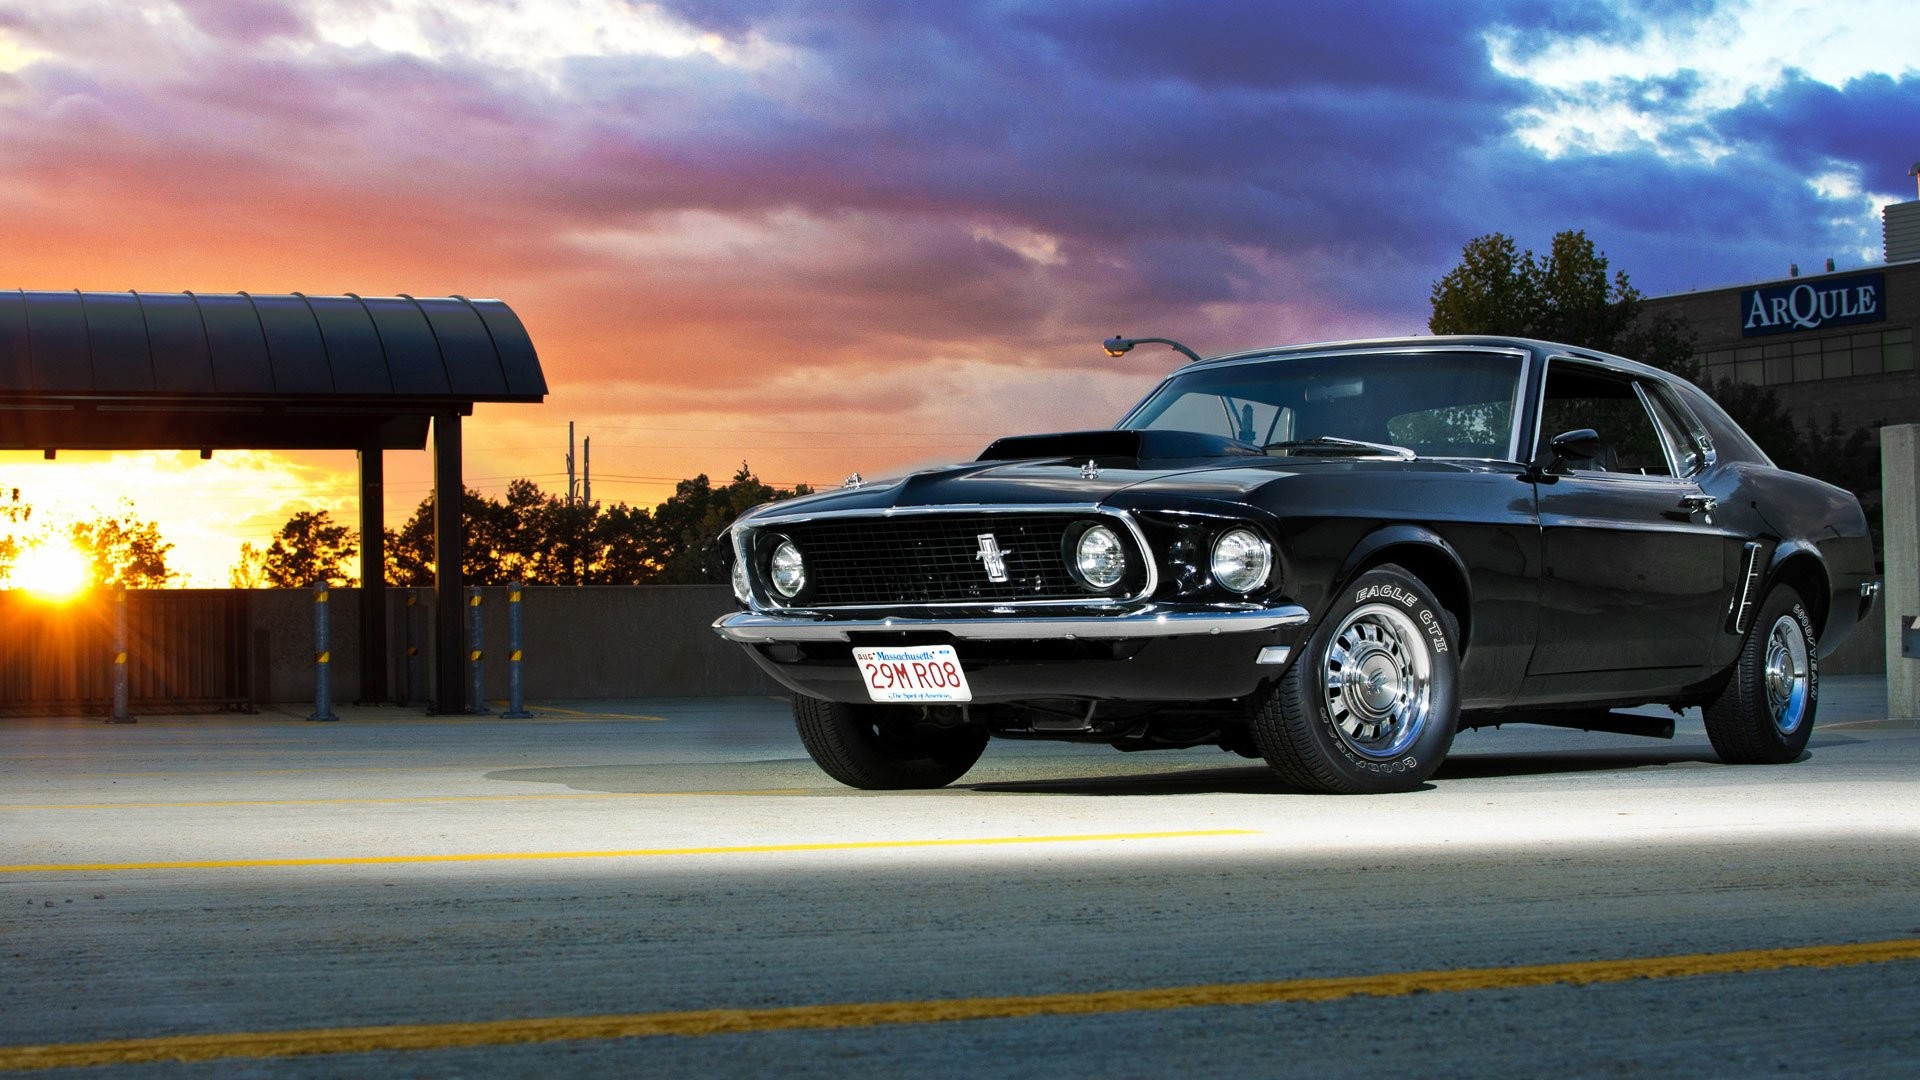 Classic Ford Mustang Wallpaper (74+ images)